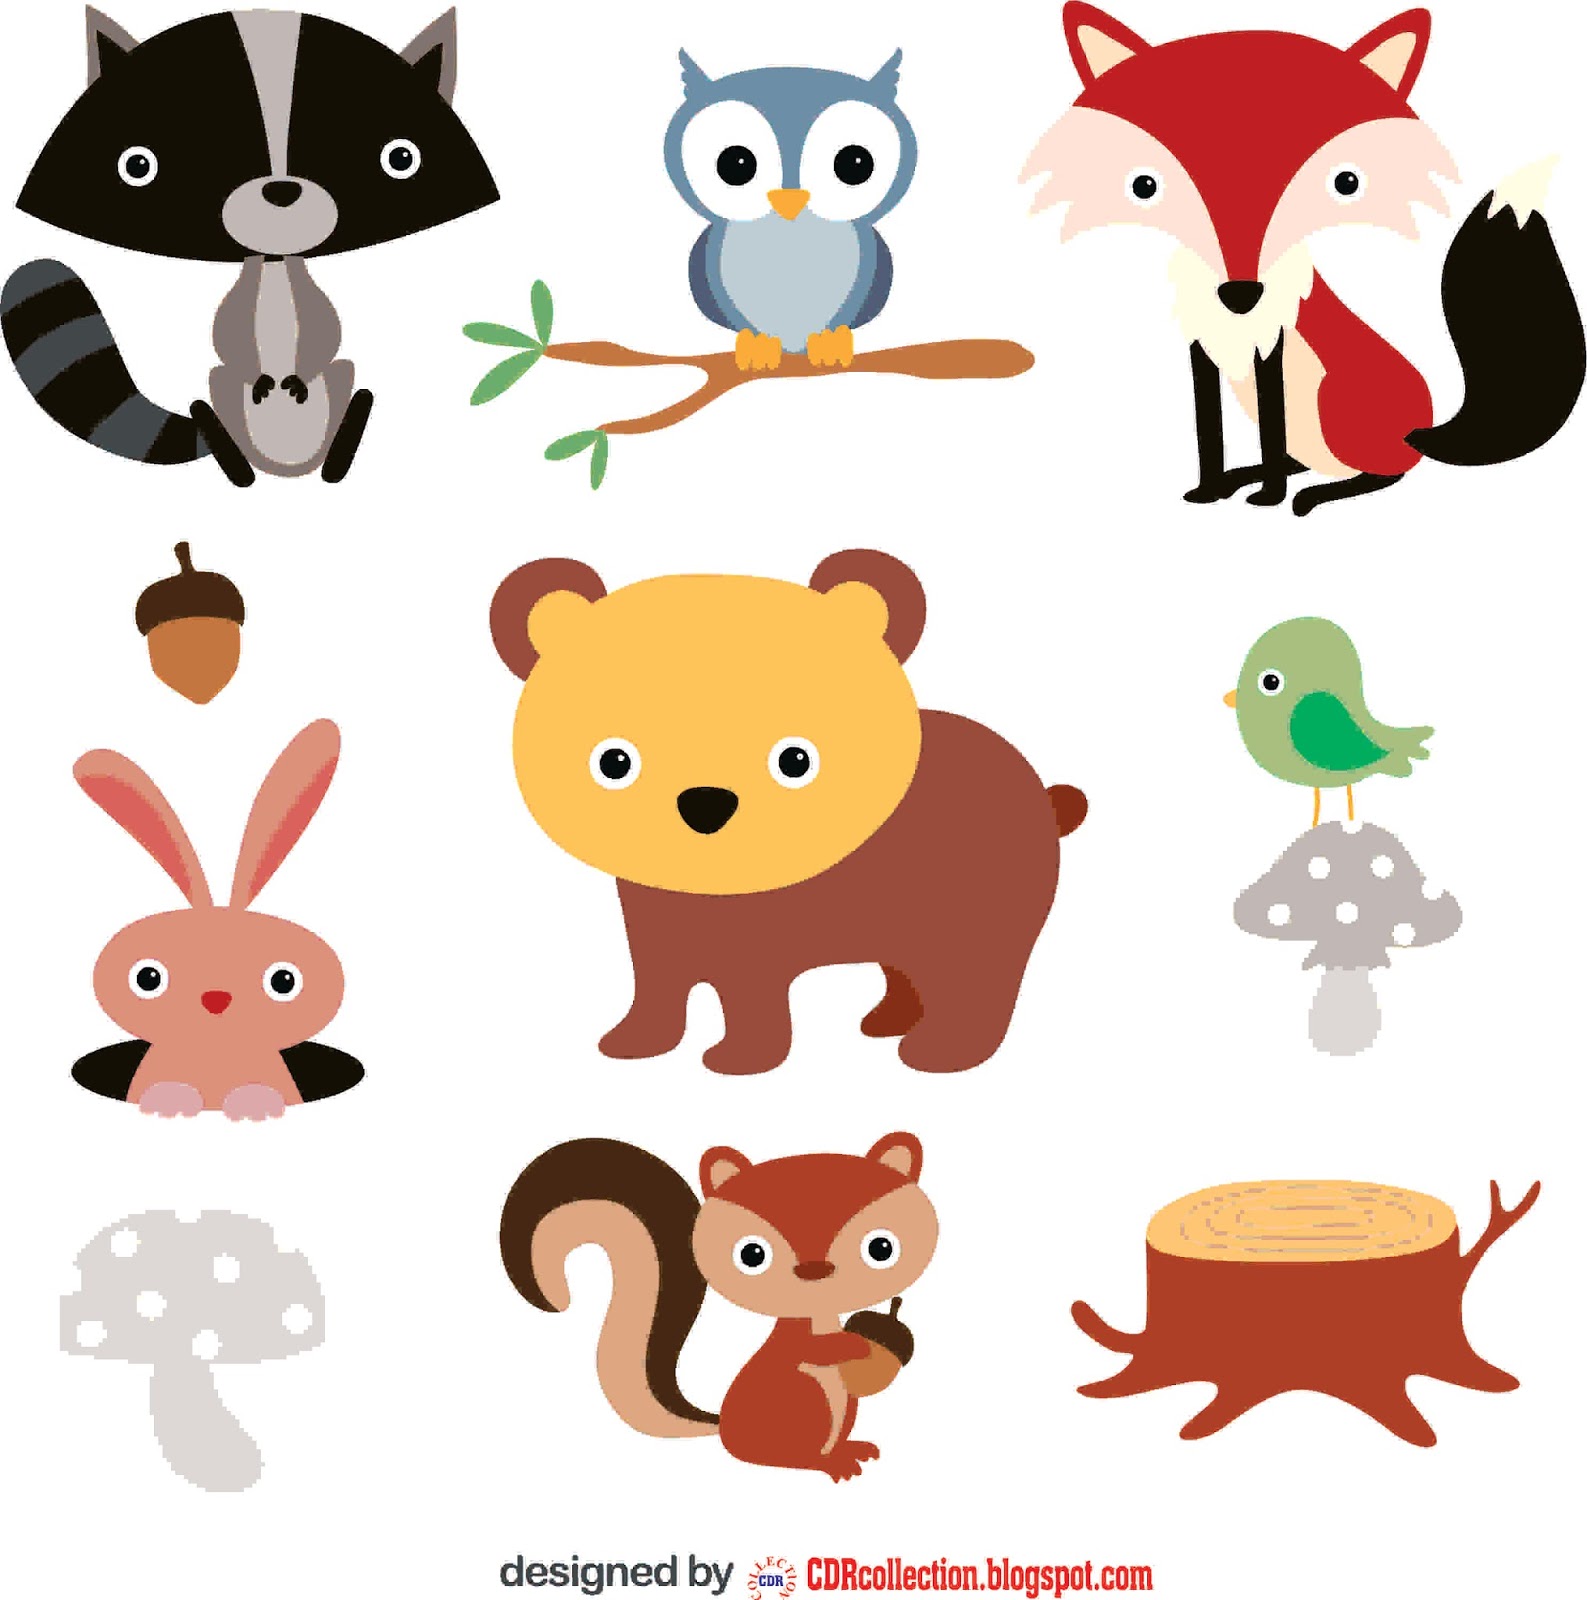 Cute forest animals Free Vector - Latest CDR Designs Collection